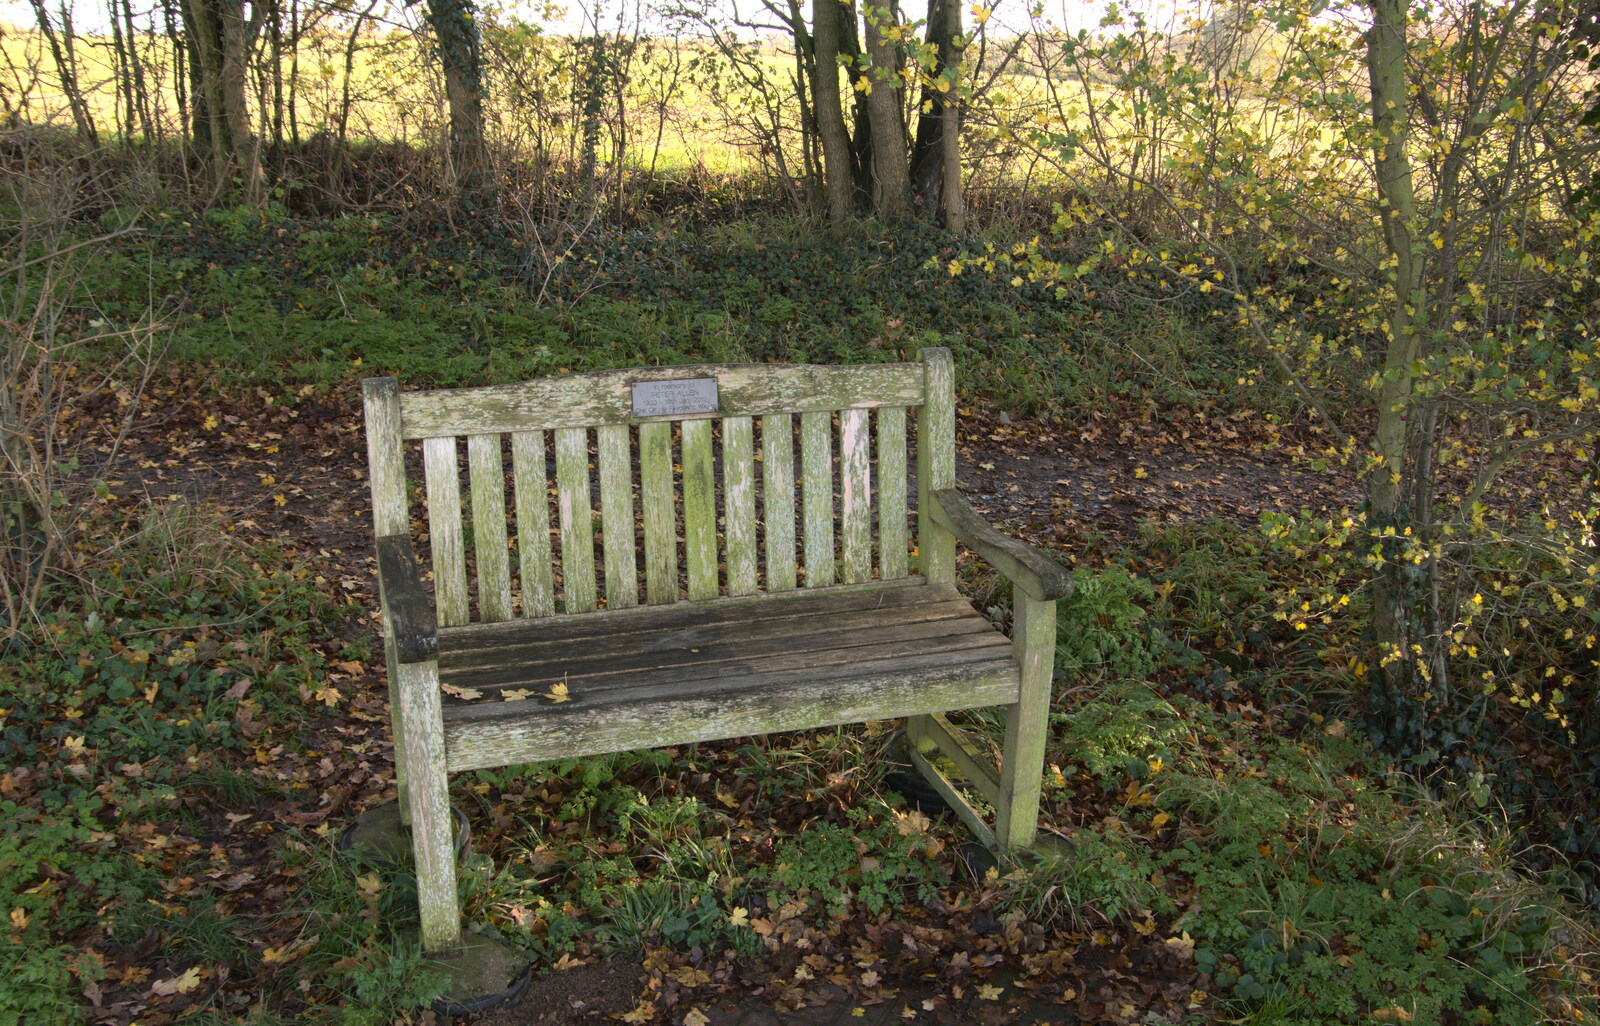 A bench dedicated to the late Peter Allen from Drone Flying and the Old Chapel, Thrandeston, Suffolk - 15th November 2020